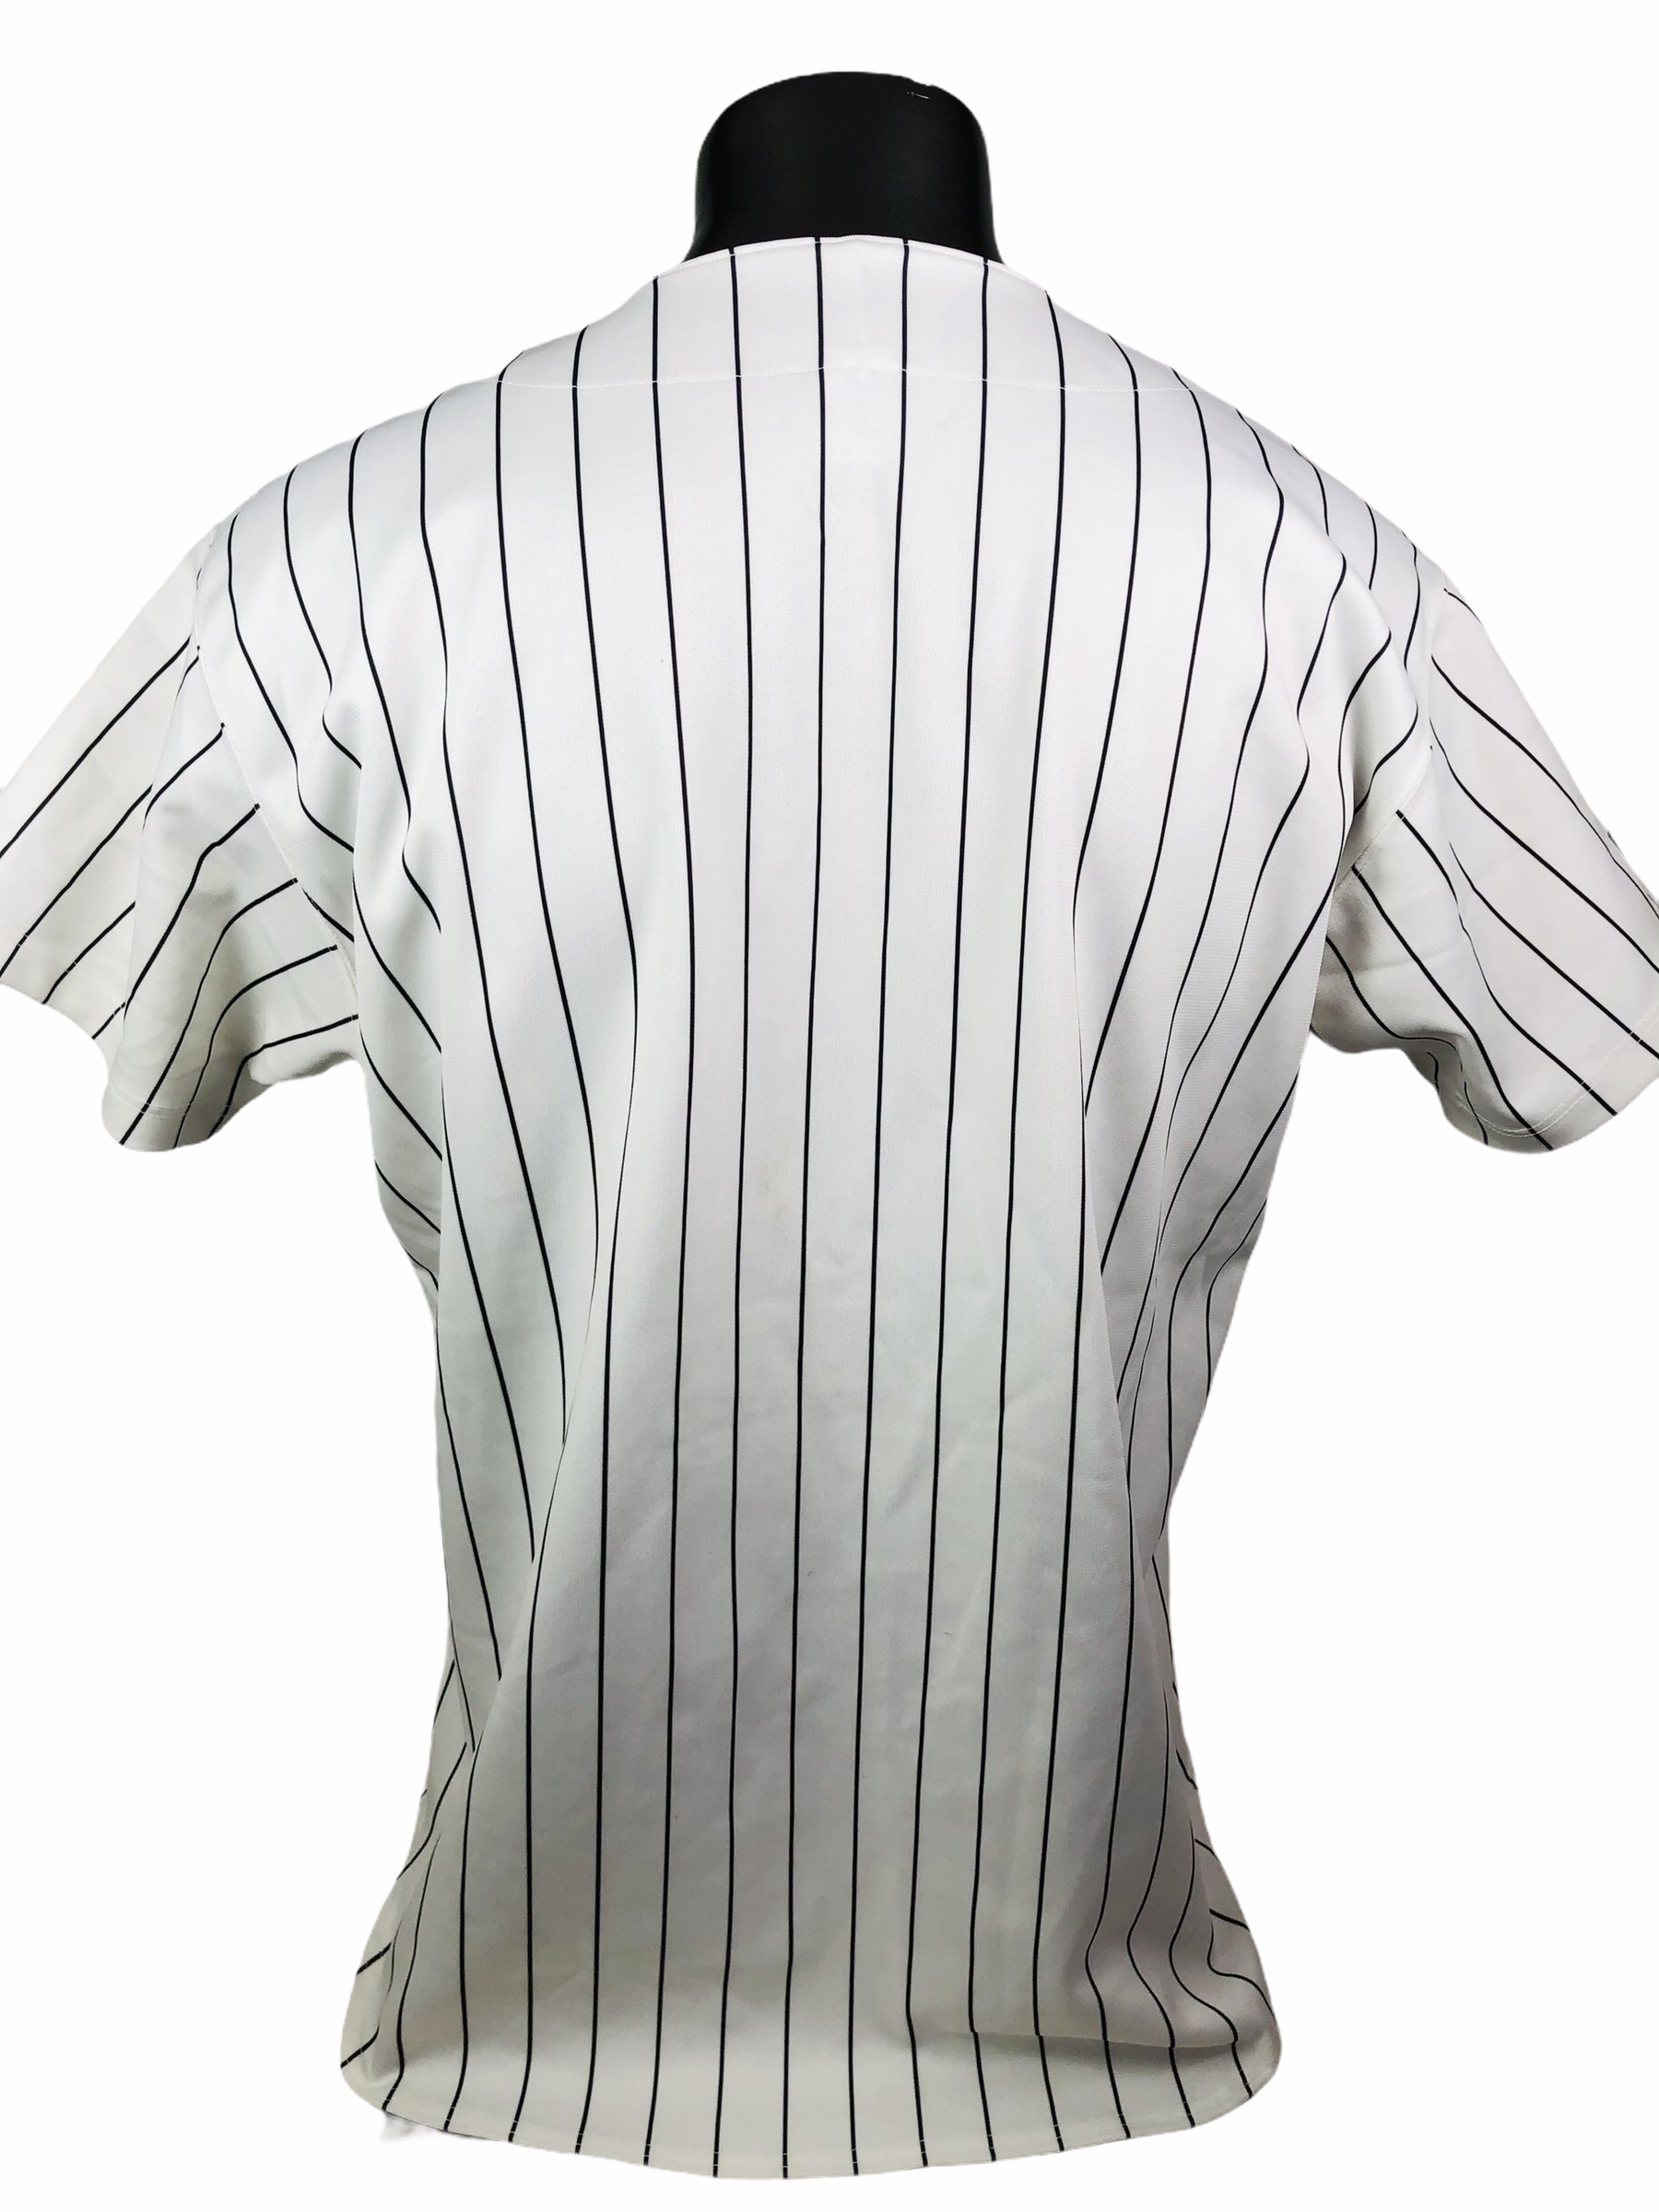 AUTHENTIC RUSSELL CHICAGO WHITE SOX BASEBALL JERSEY DIAMOND